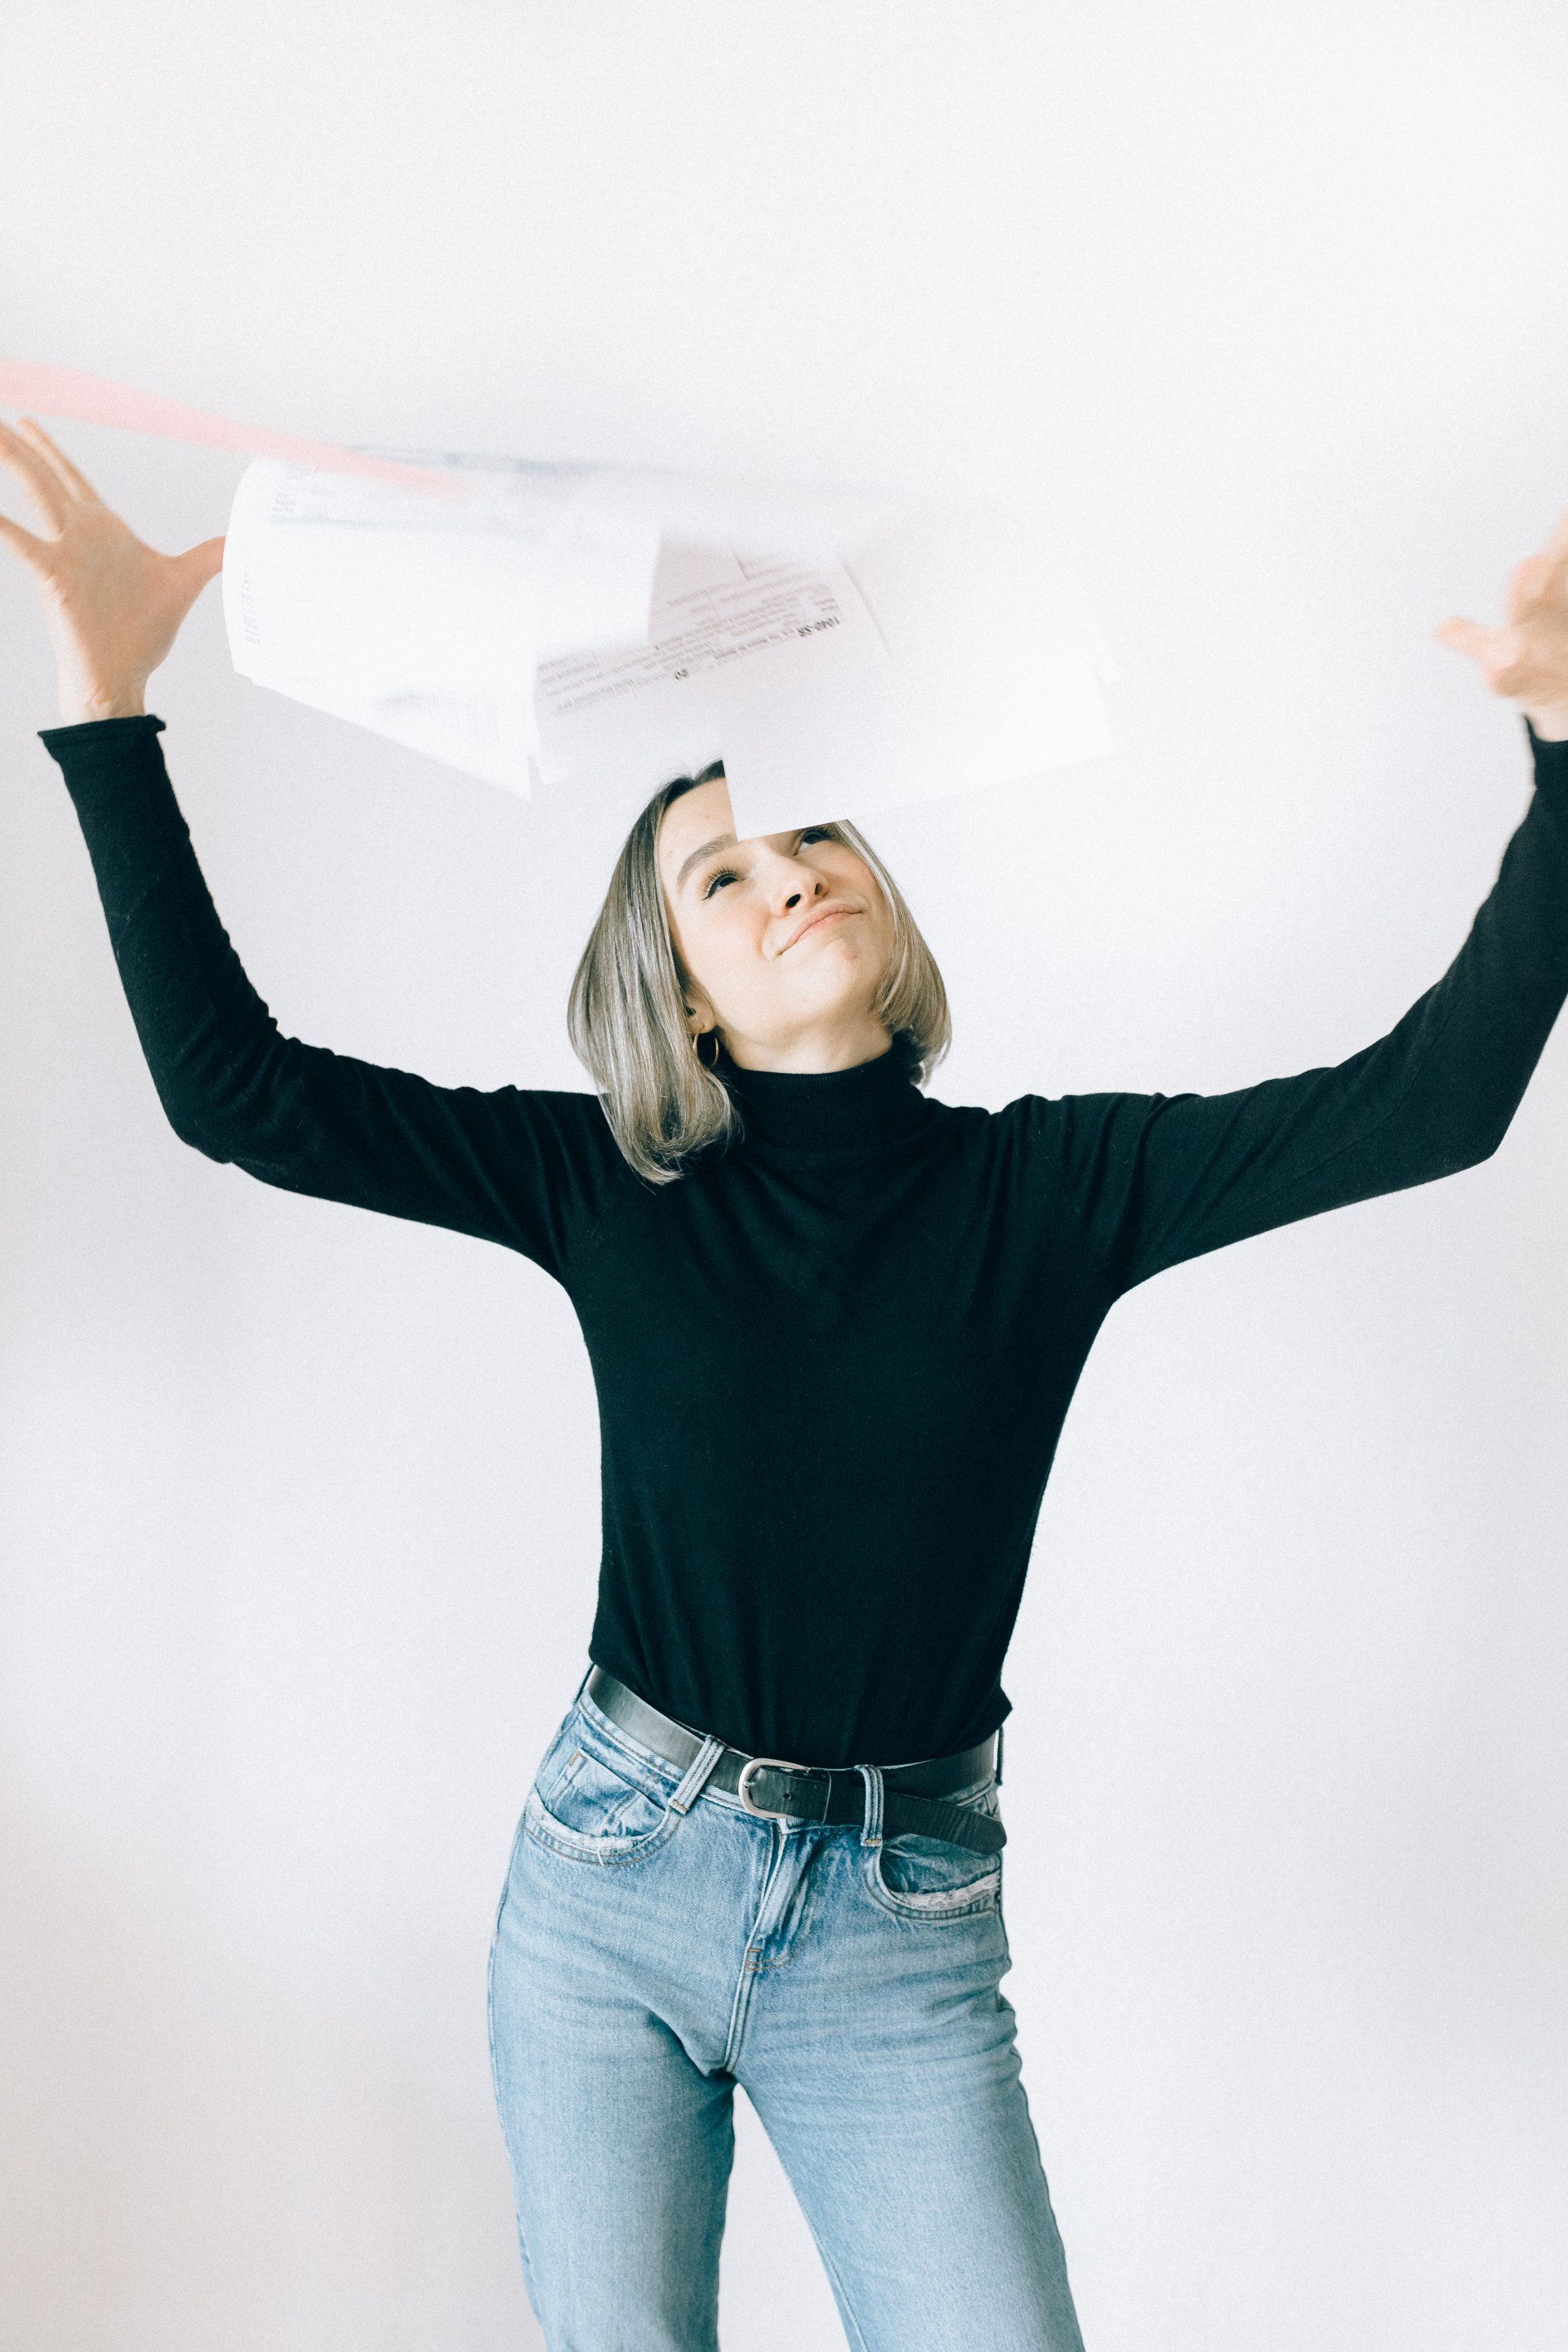 Woman with bob haircut and long blacksleeve shirt throwing 1040 papers in the air